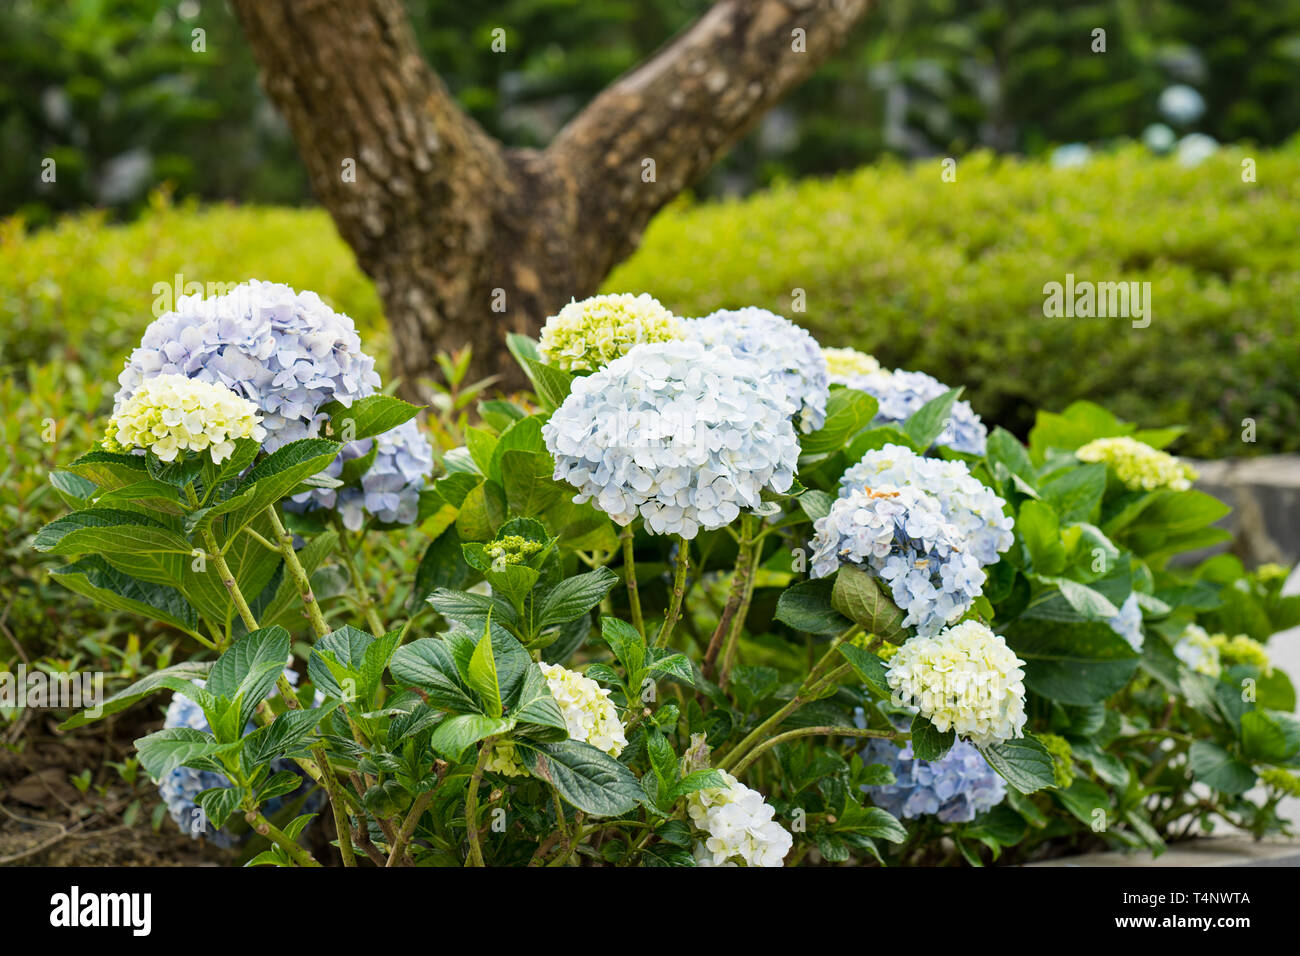 Beautiful hydranges against tree stump on background in the garden Stock Photo